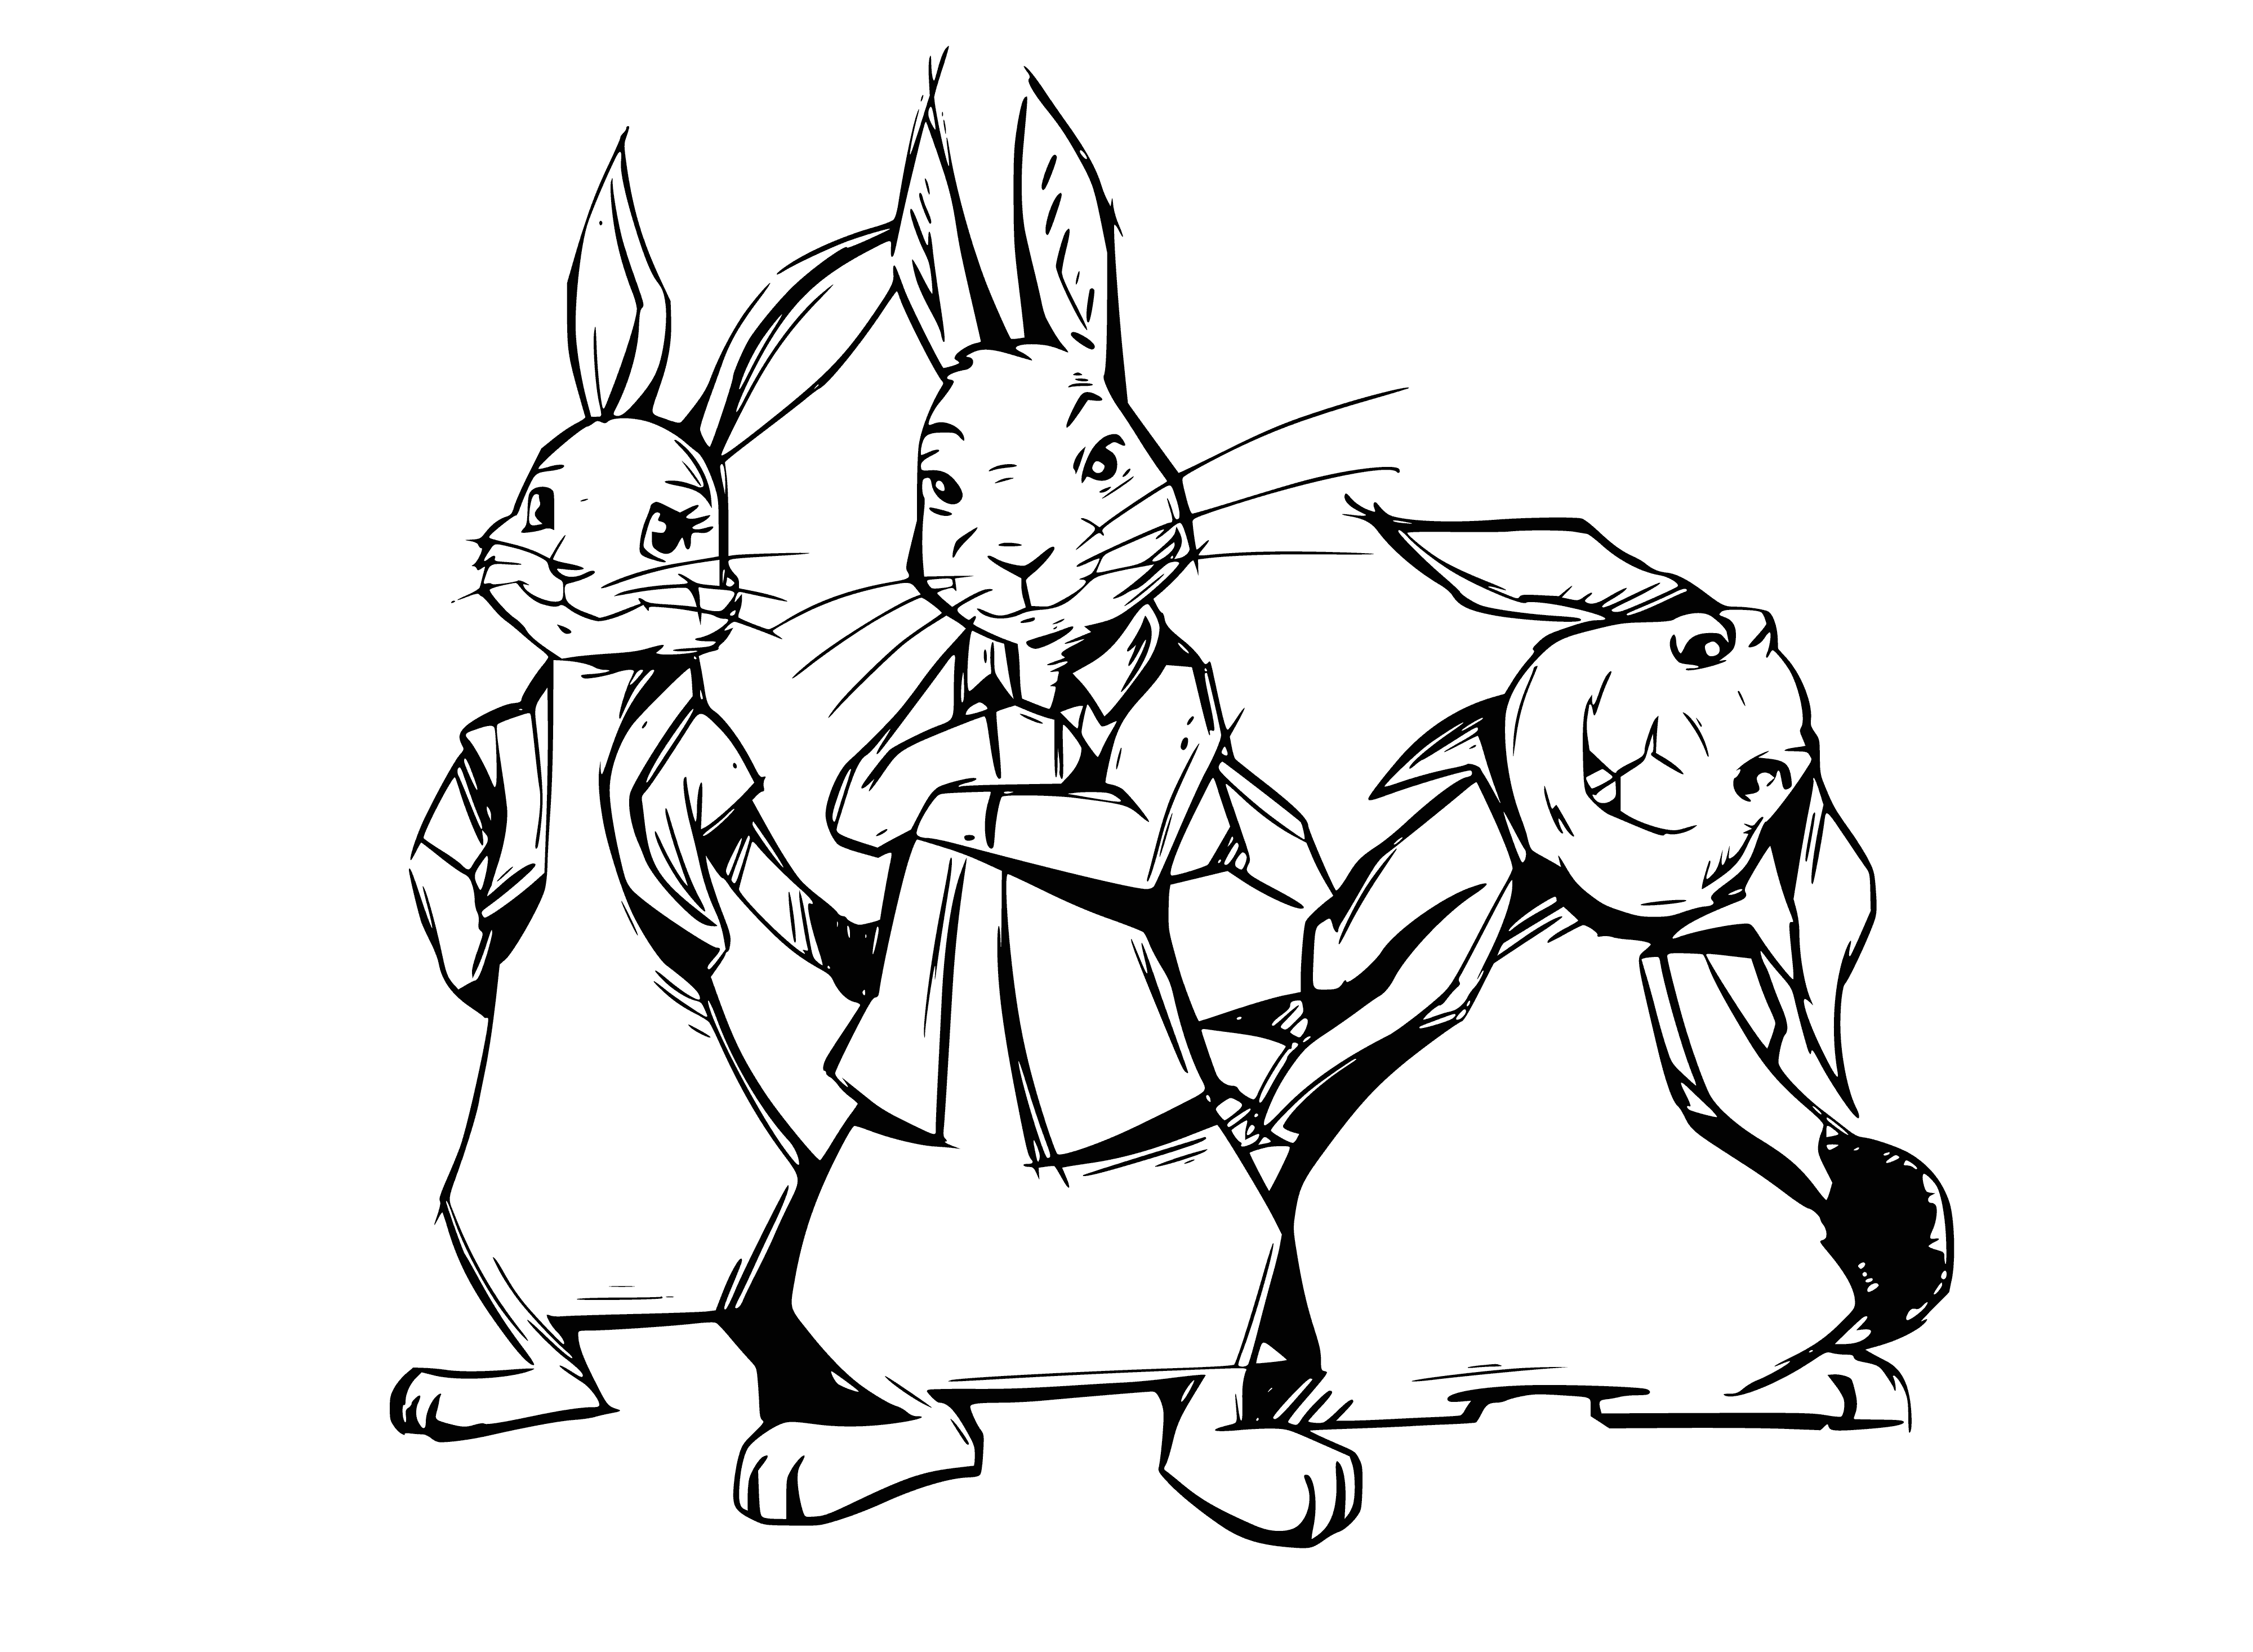 coloring page: Two rabbits, one white & one brown, stand & eat a carrot. The white rabbit has its paws in the air. #ColoringPage